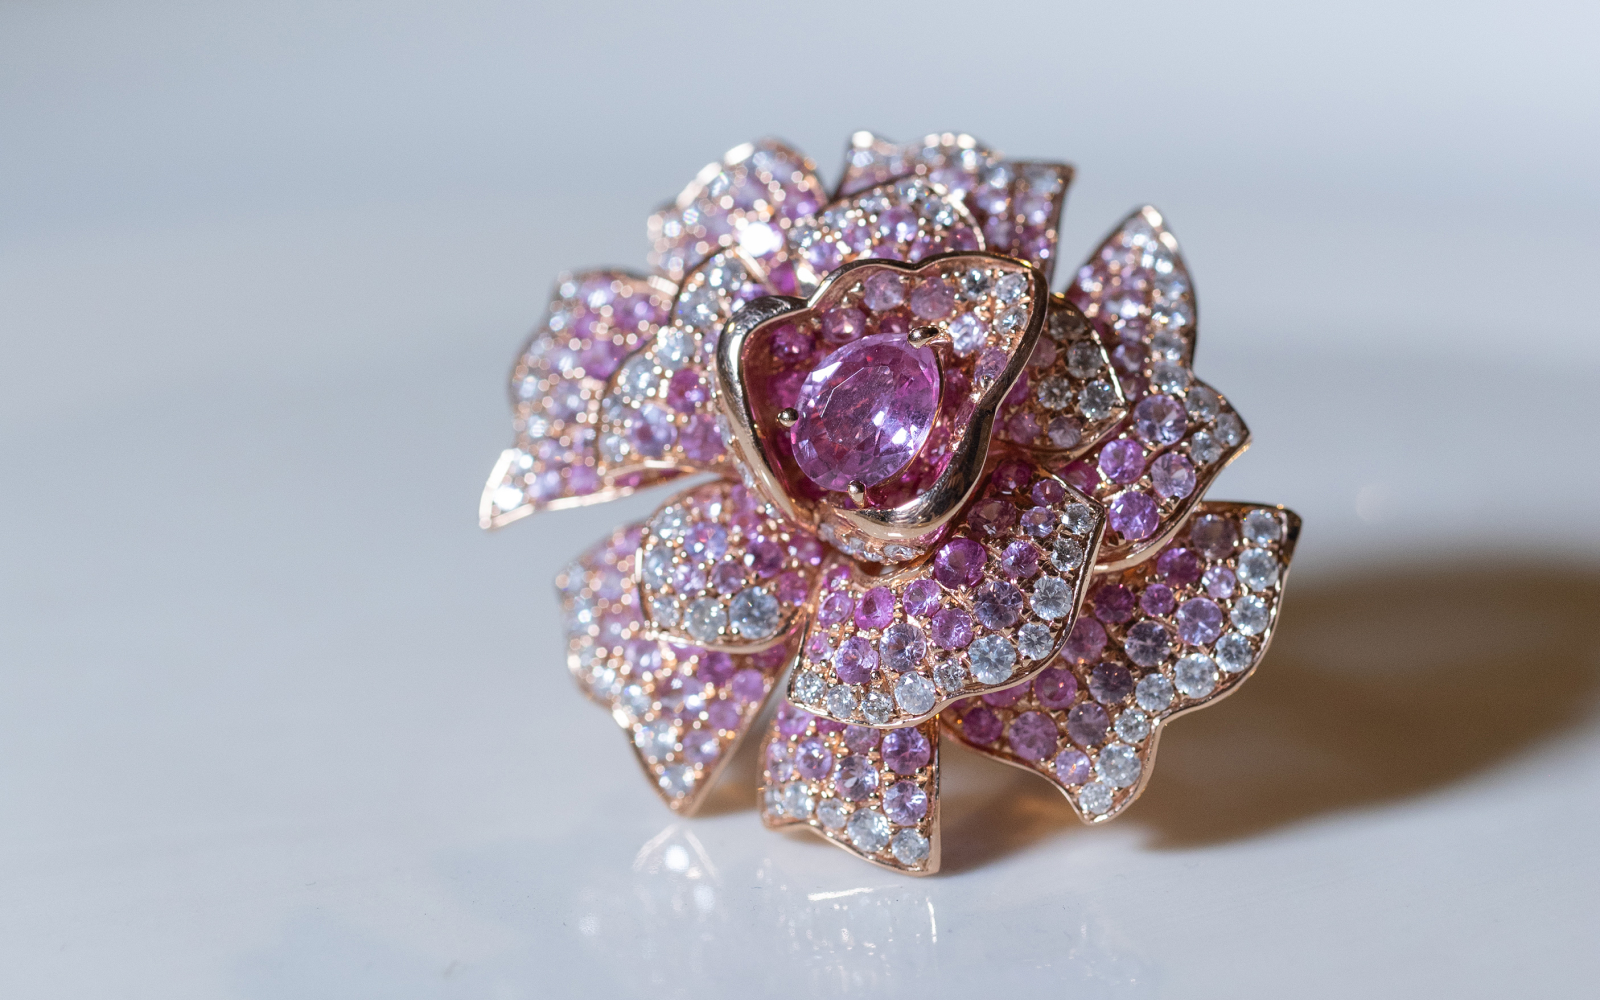 ZARIG Pink Peony cocktail ring with 7.28 carats of pink sapphires and 1.19 carats of colourless diamonds in 18k rose gold 